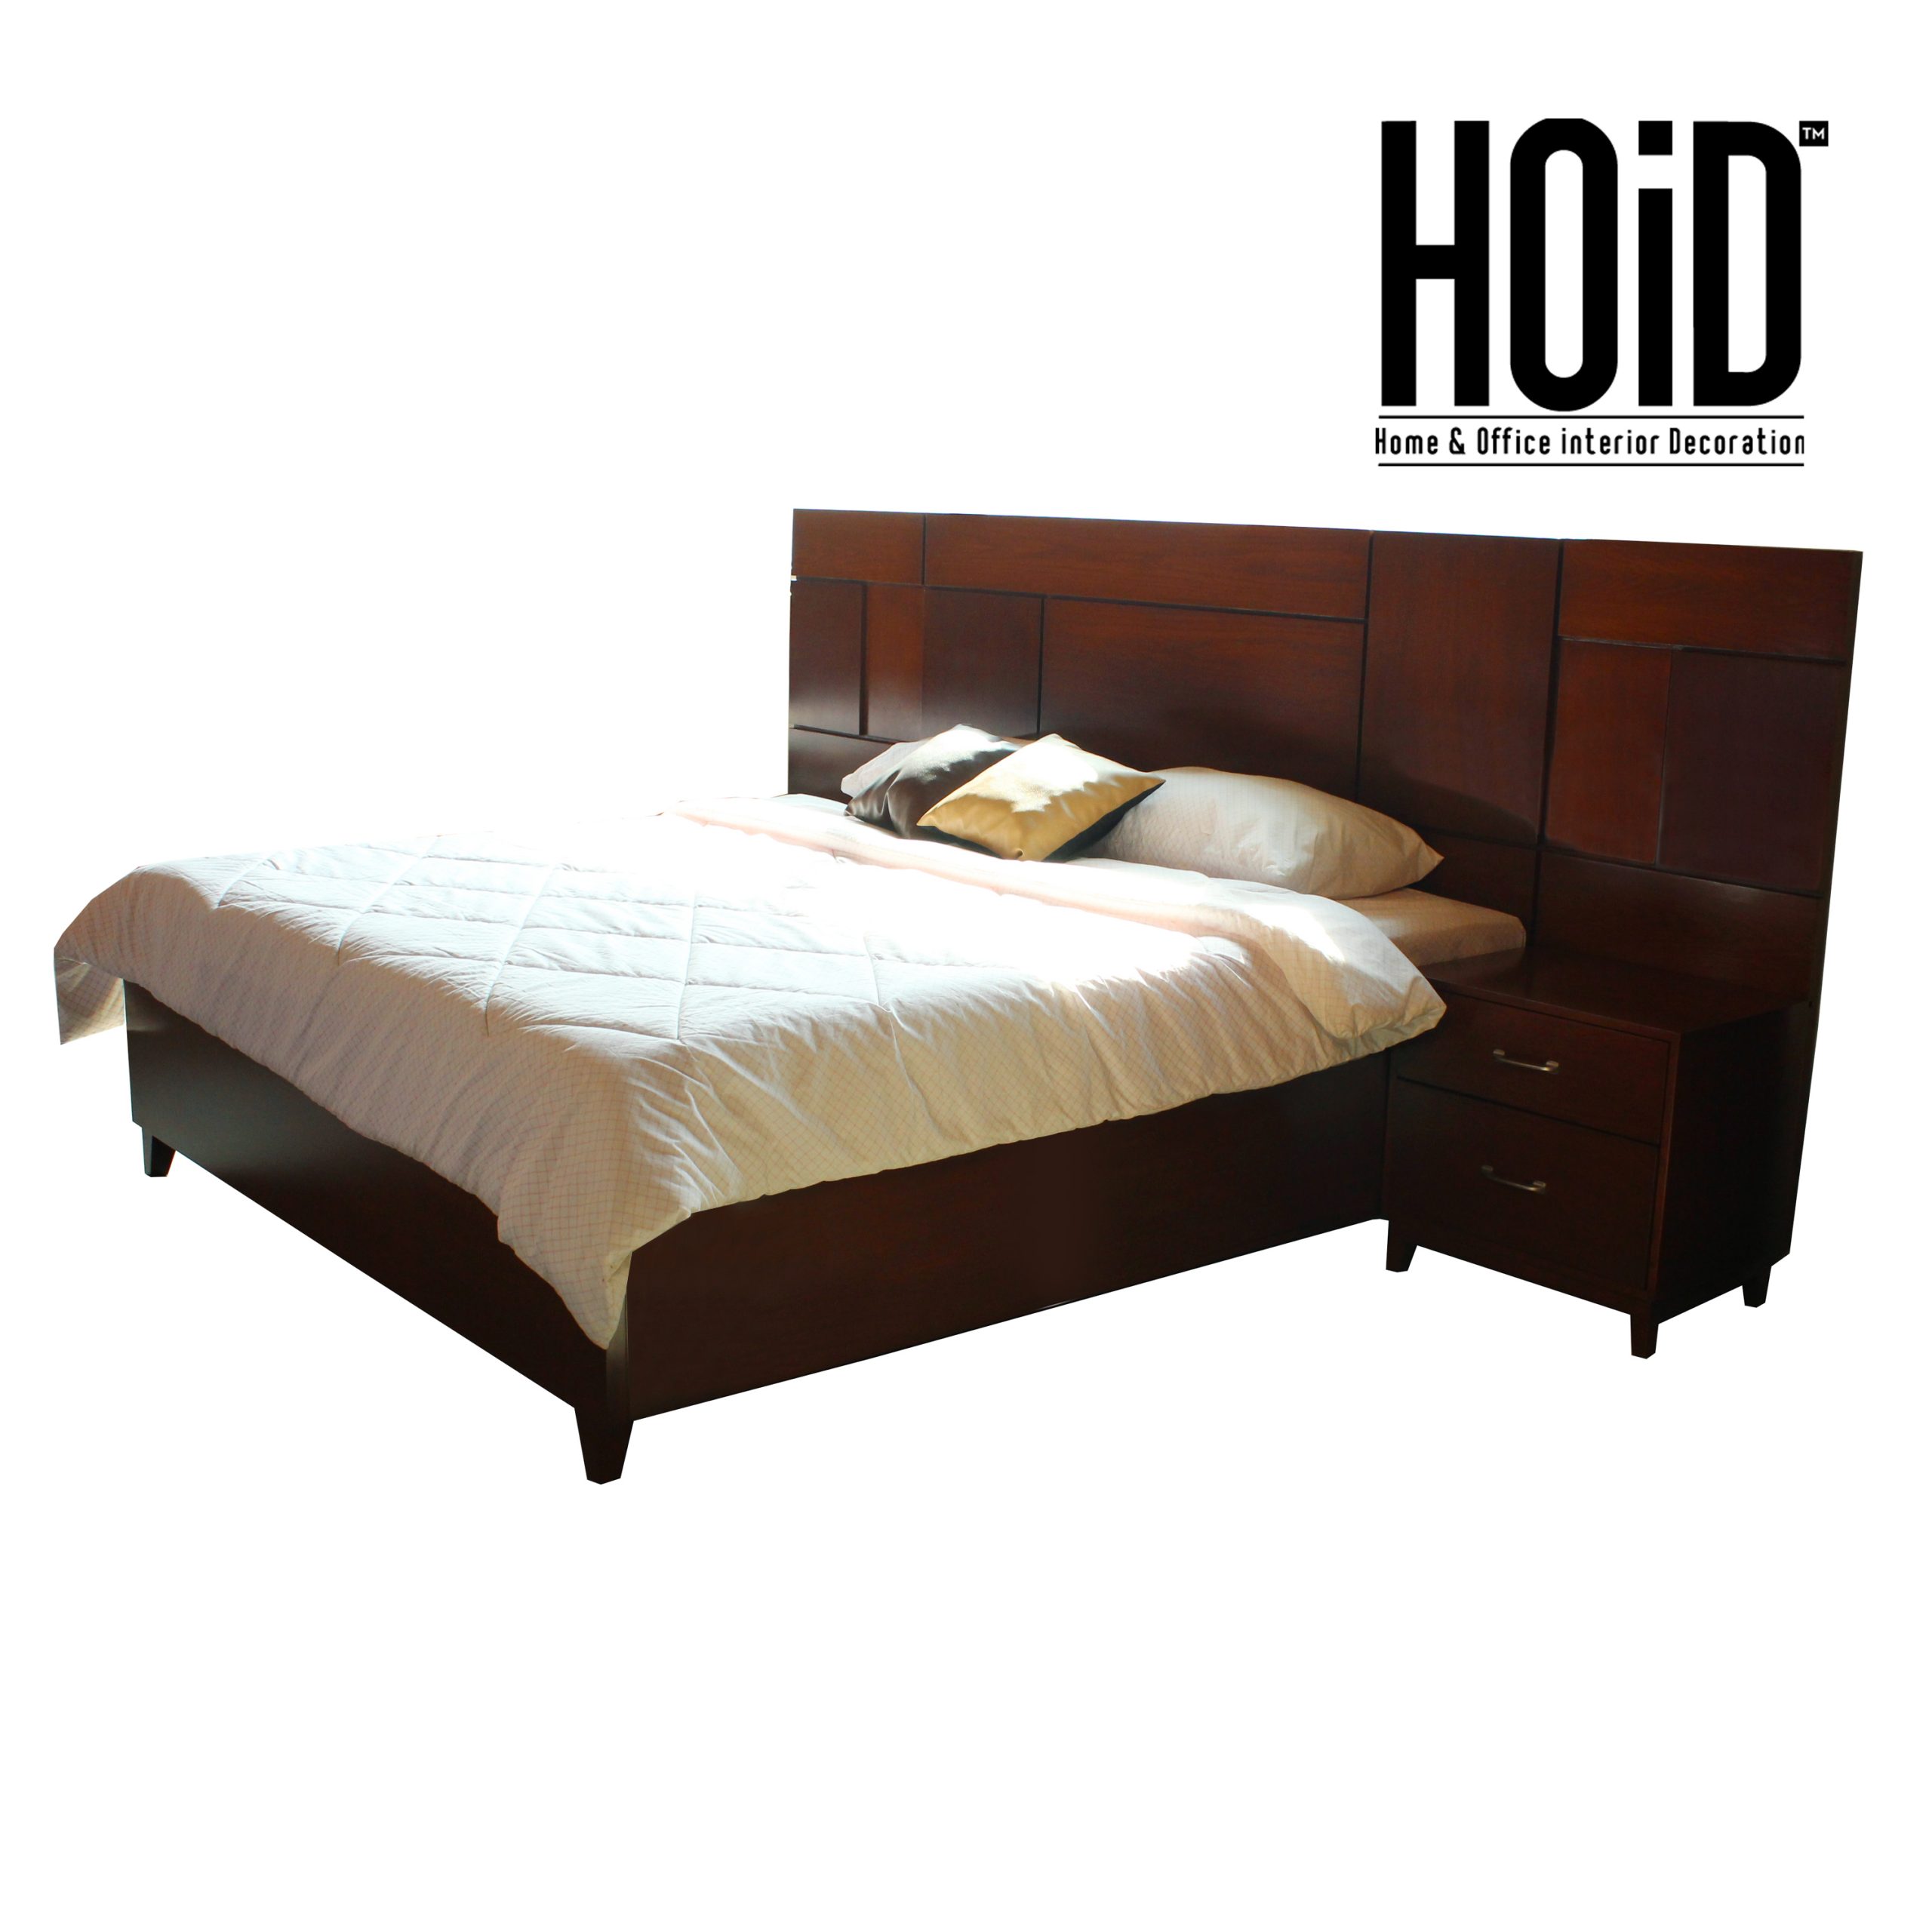 Peck-bed-with-2-side-tables-scaled-2.jpg